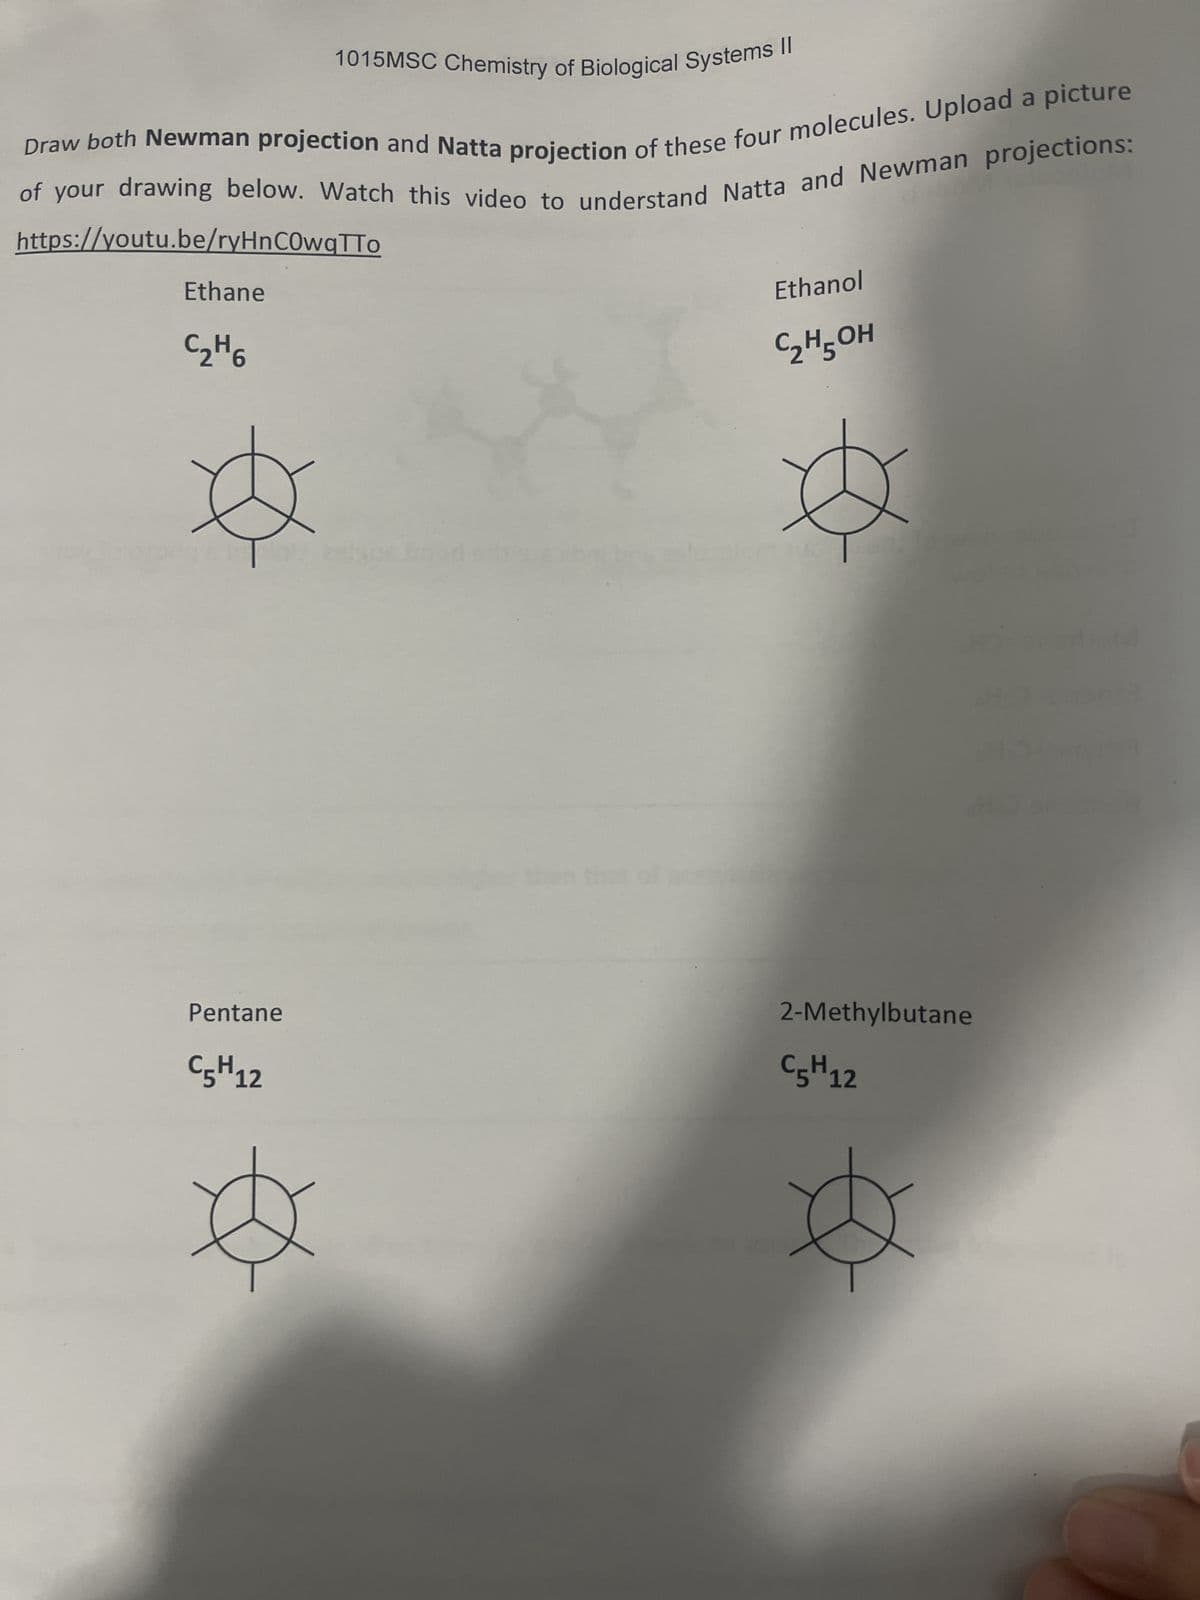 1015MSC Chemistry of Biological Systems II
Draw both Newman projection and Natta projection of these four molecules. Upload a picture
of your drawing below. Watch this video to understand Natta and Newman projections:
https://youtu.be/ryHnCOwqTTO
Ethane
C₂H6
Pentane
C5H 12
epis
Ethanol
C₂H5OH
2-Methylbutane
C5H 12
Ø
Hom